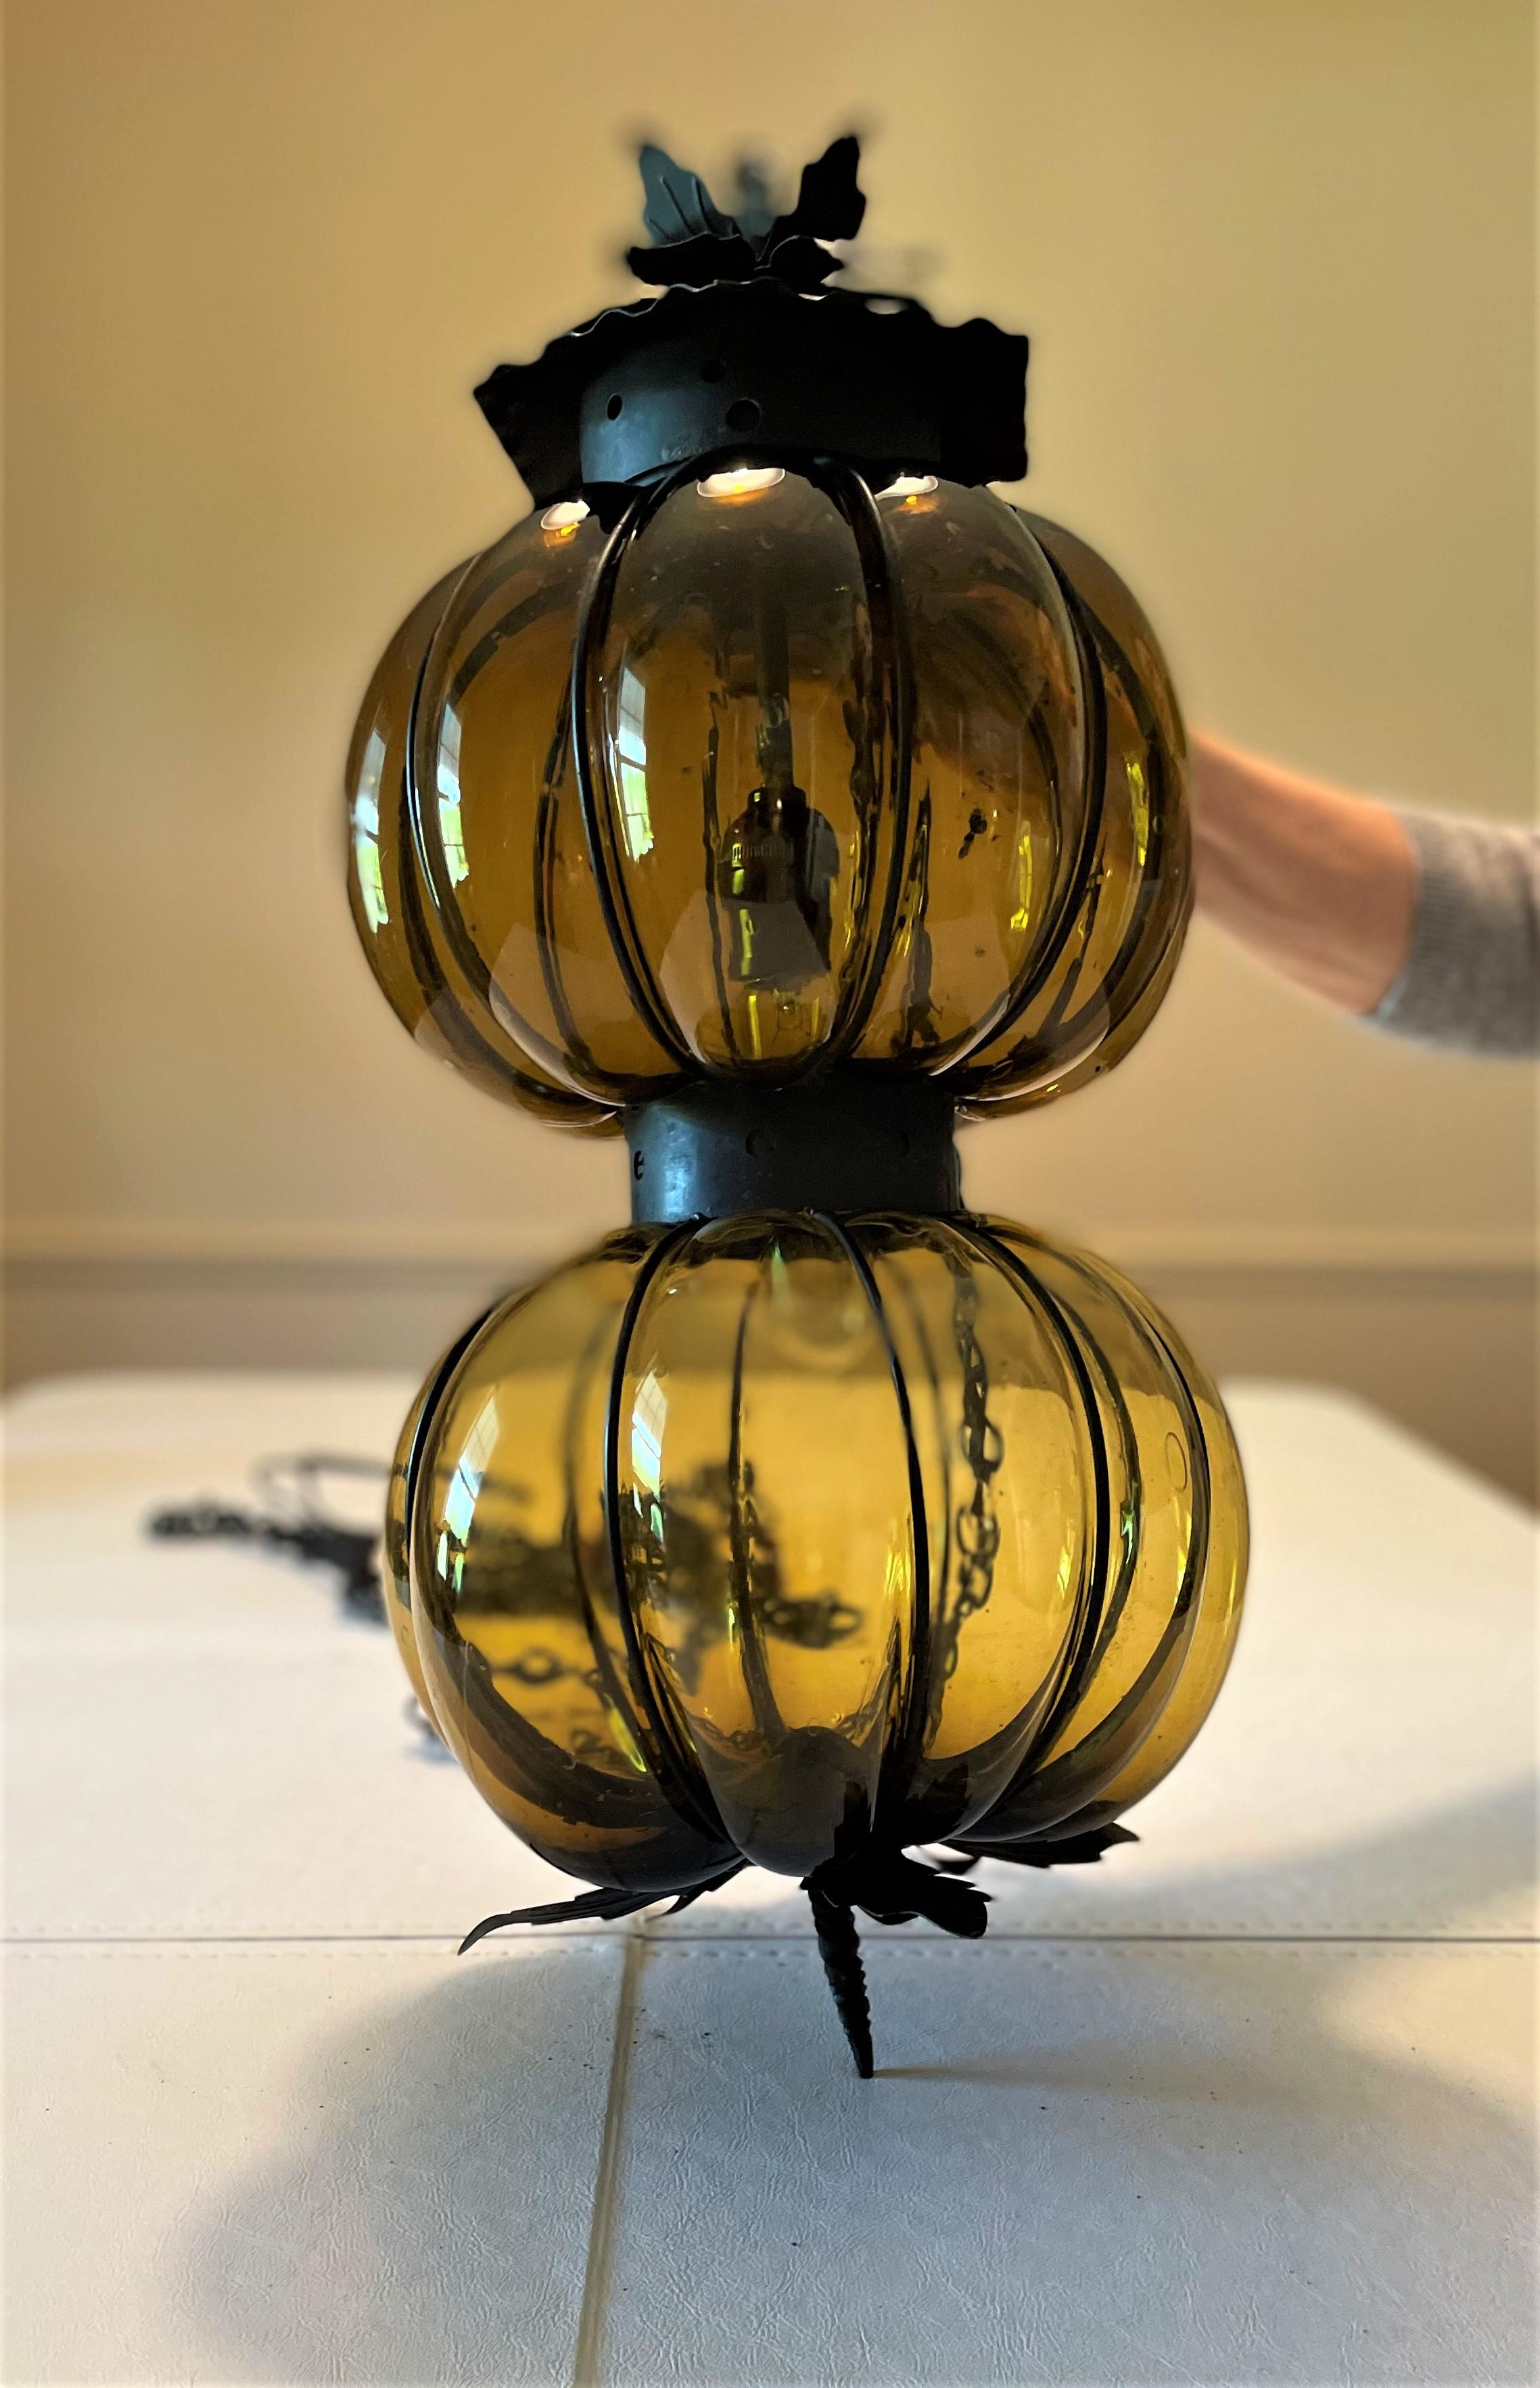 So very 1960s Mod! This large gourd Mexican blown-glass pendant lantern is sized well and has great proportions. It is in mint condition. The olive-green glass casts a moody ambience in the room when lit with a warm bulb. The black chain, intended